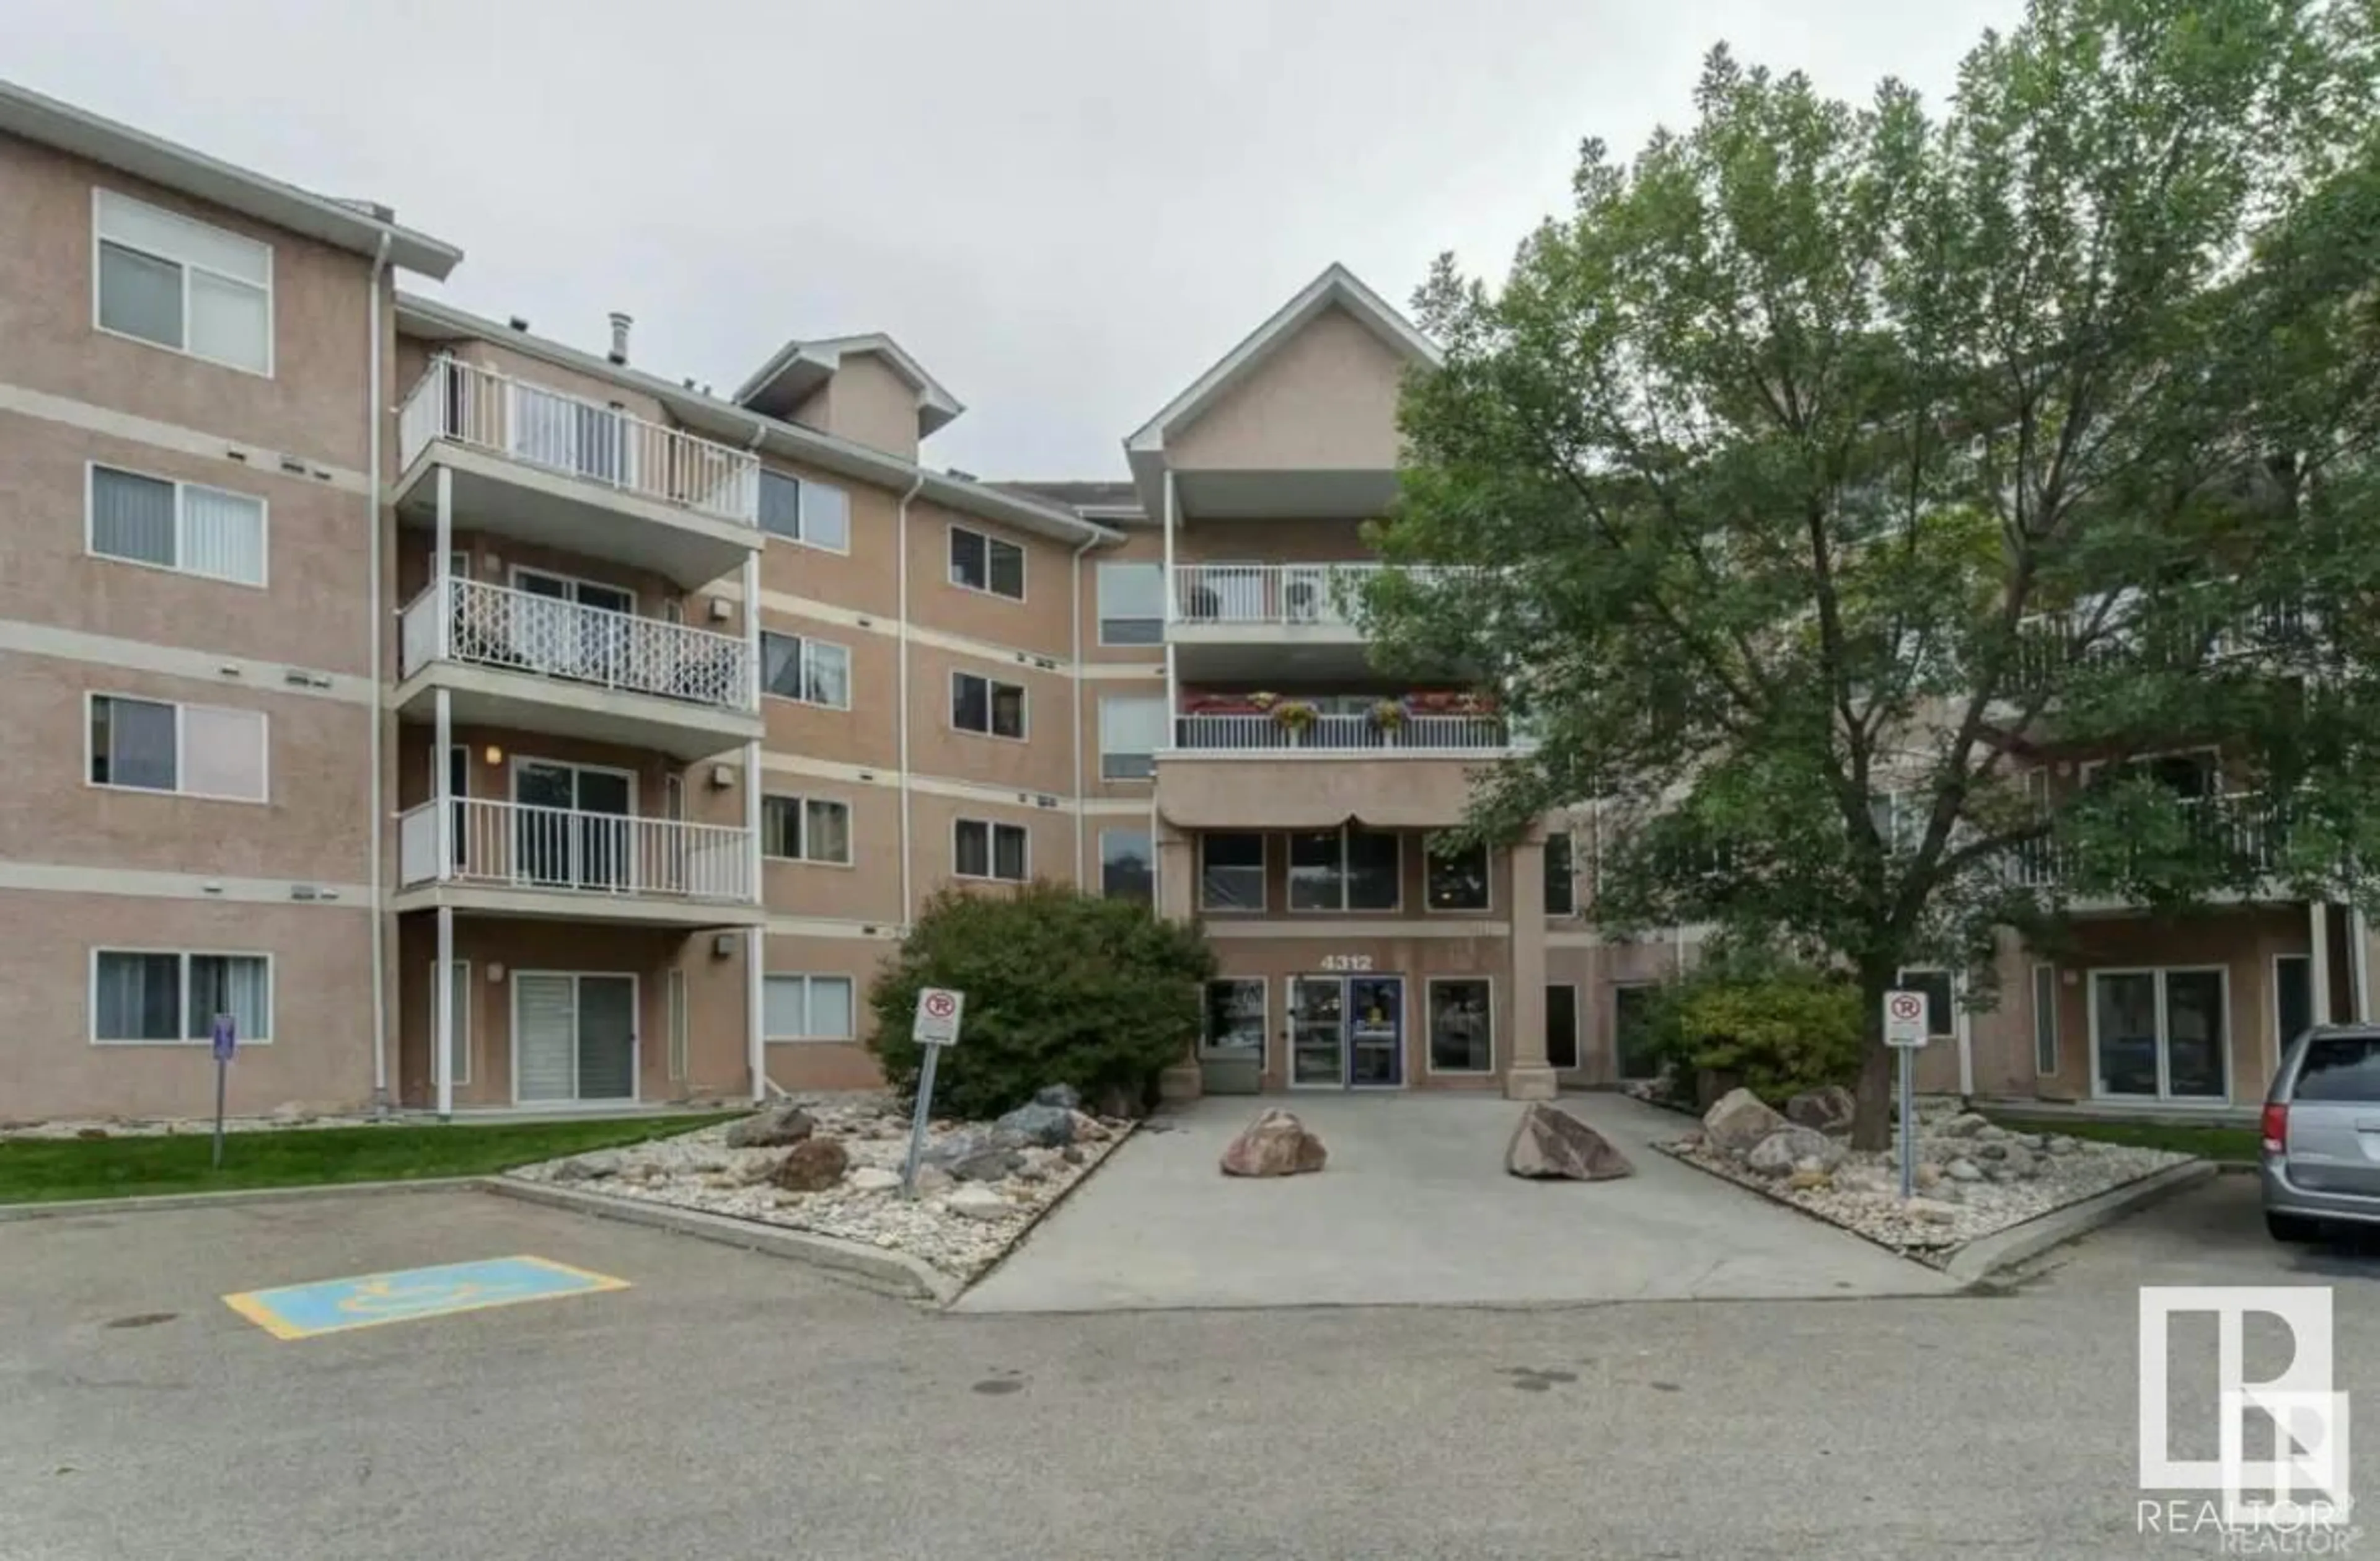 A pic from exterior of the house or condo for #104 4312 139 AV NW, Edmonton Alberta T6T1E7